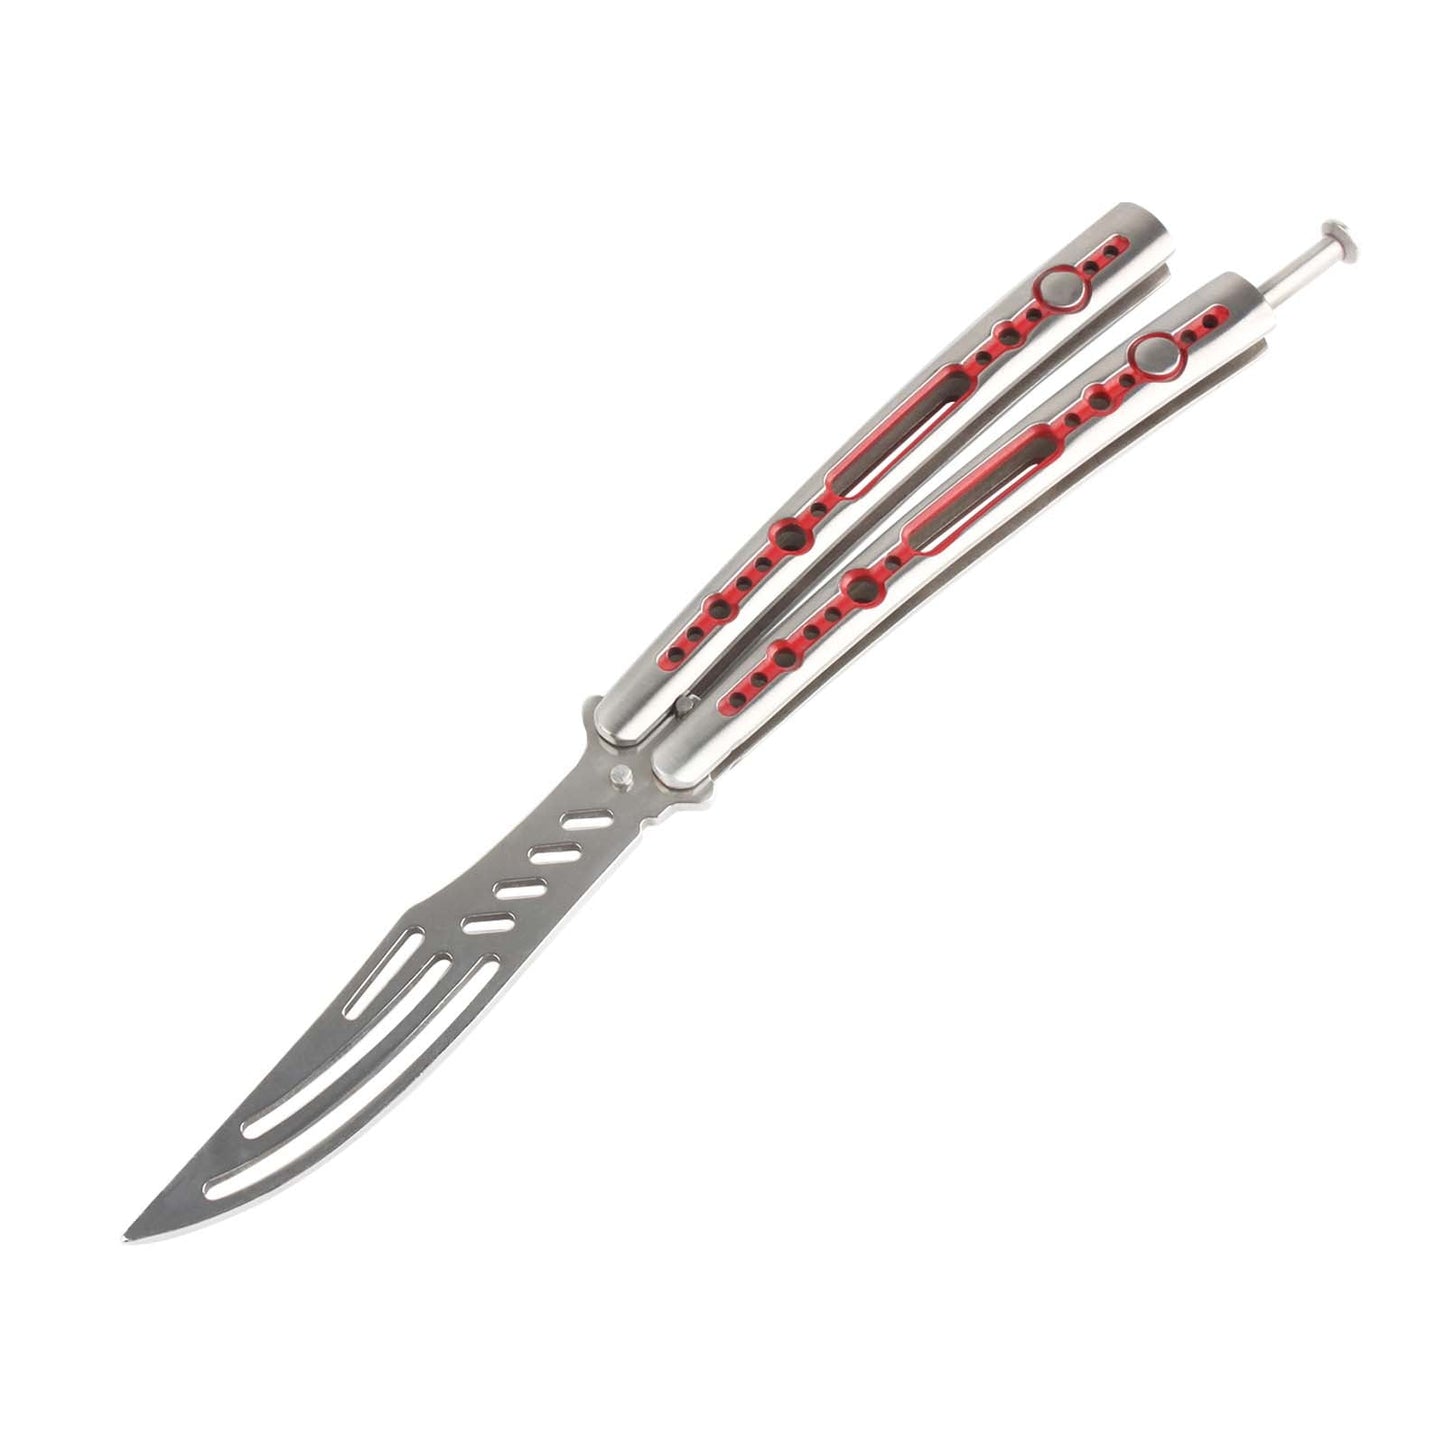 Andux Balisong Foldable Practice Flipper Tool CSGO Red(Only Available in European Countries)